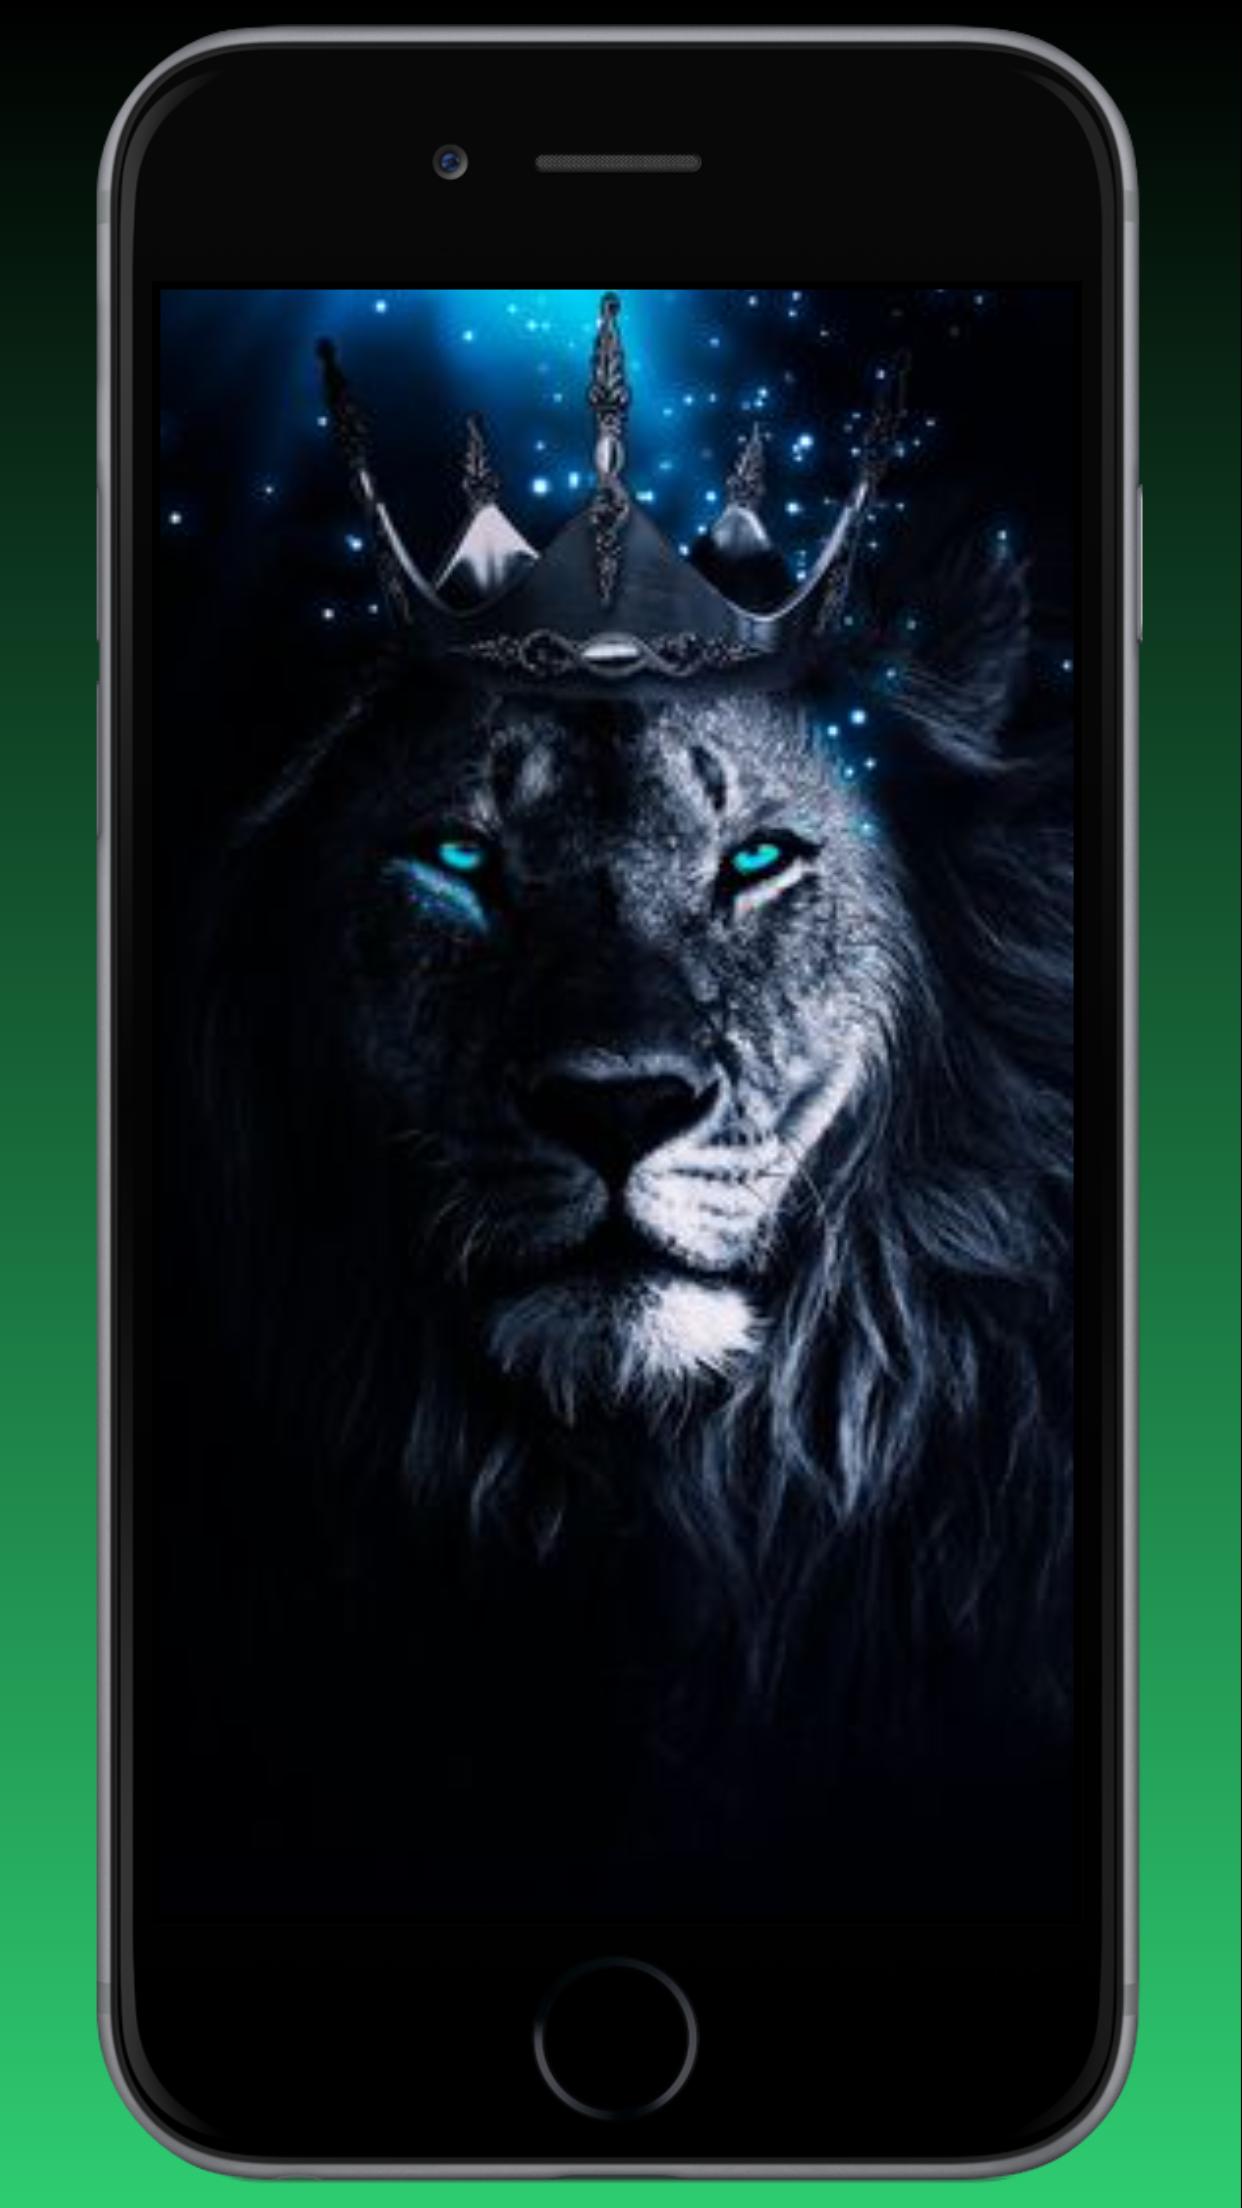 Lion wallpaper APK for Android Download